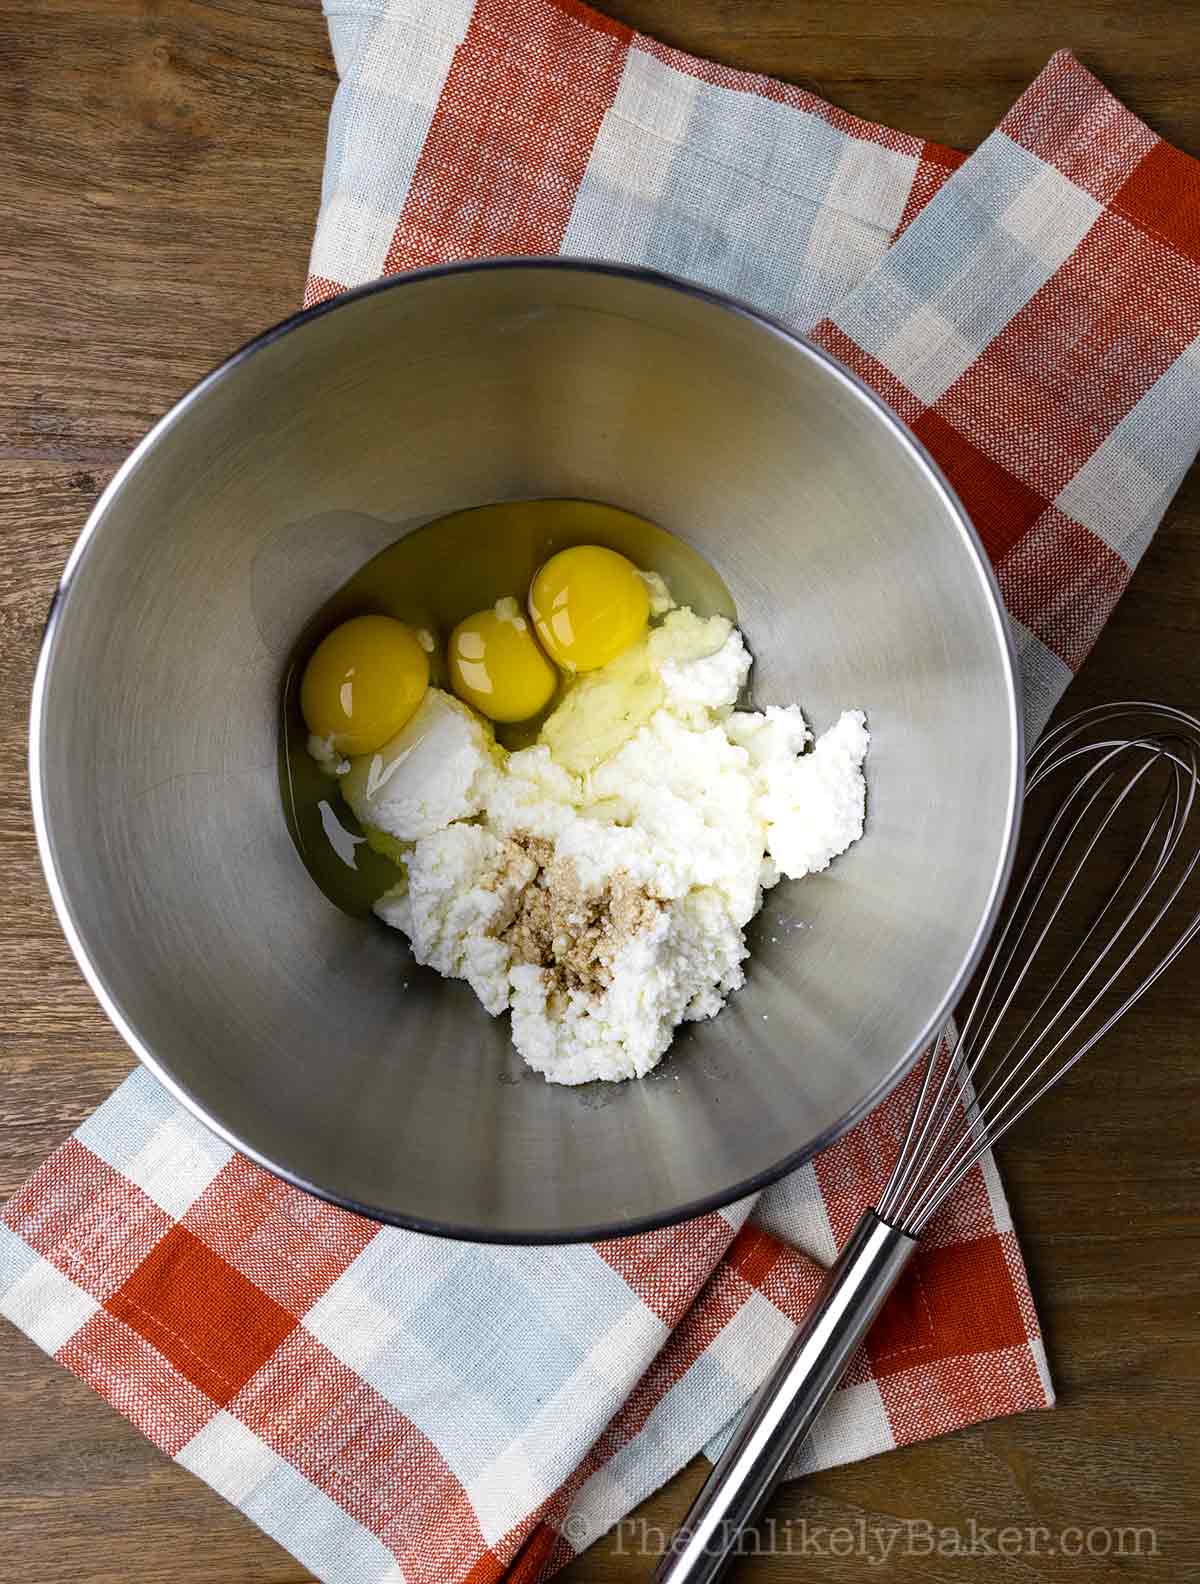 Eggs and ricotta cheese in a bowl.